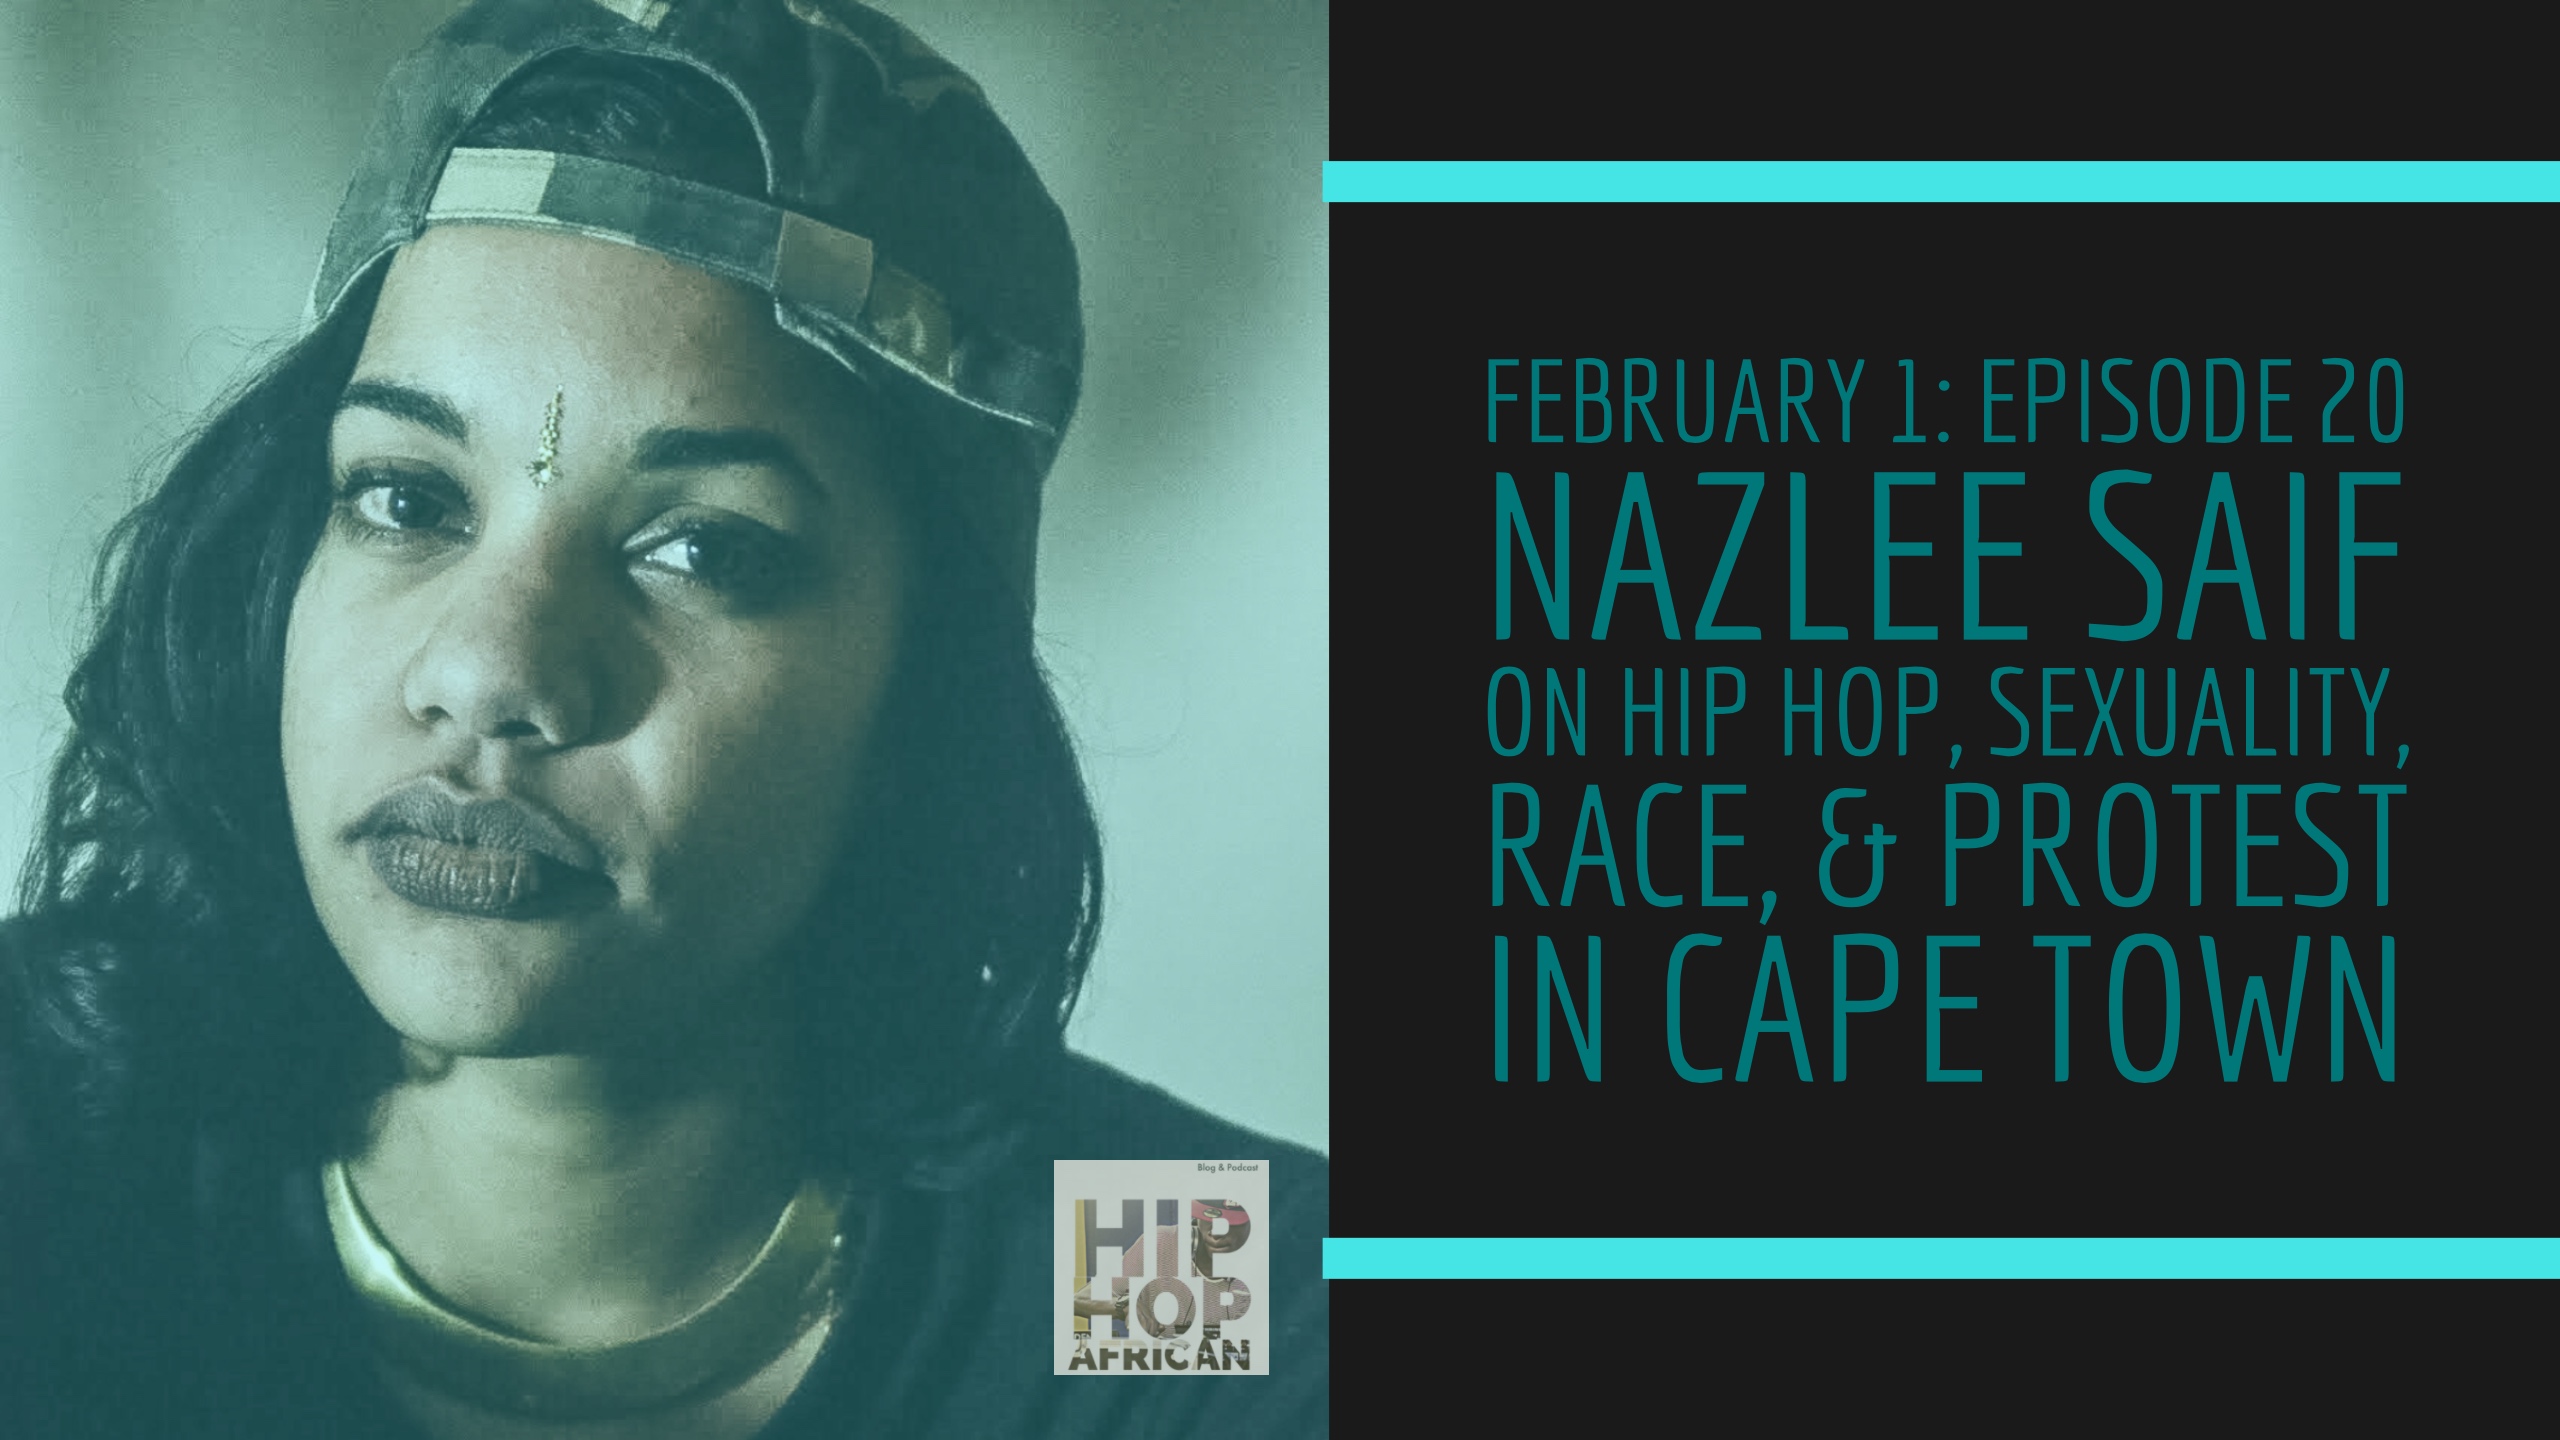 HHAP Episode 20: Nazlee Saif on Hip Hop, Sexuality, Race, & Protest in Cape Town